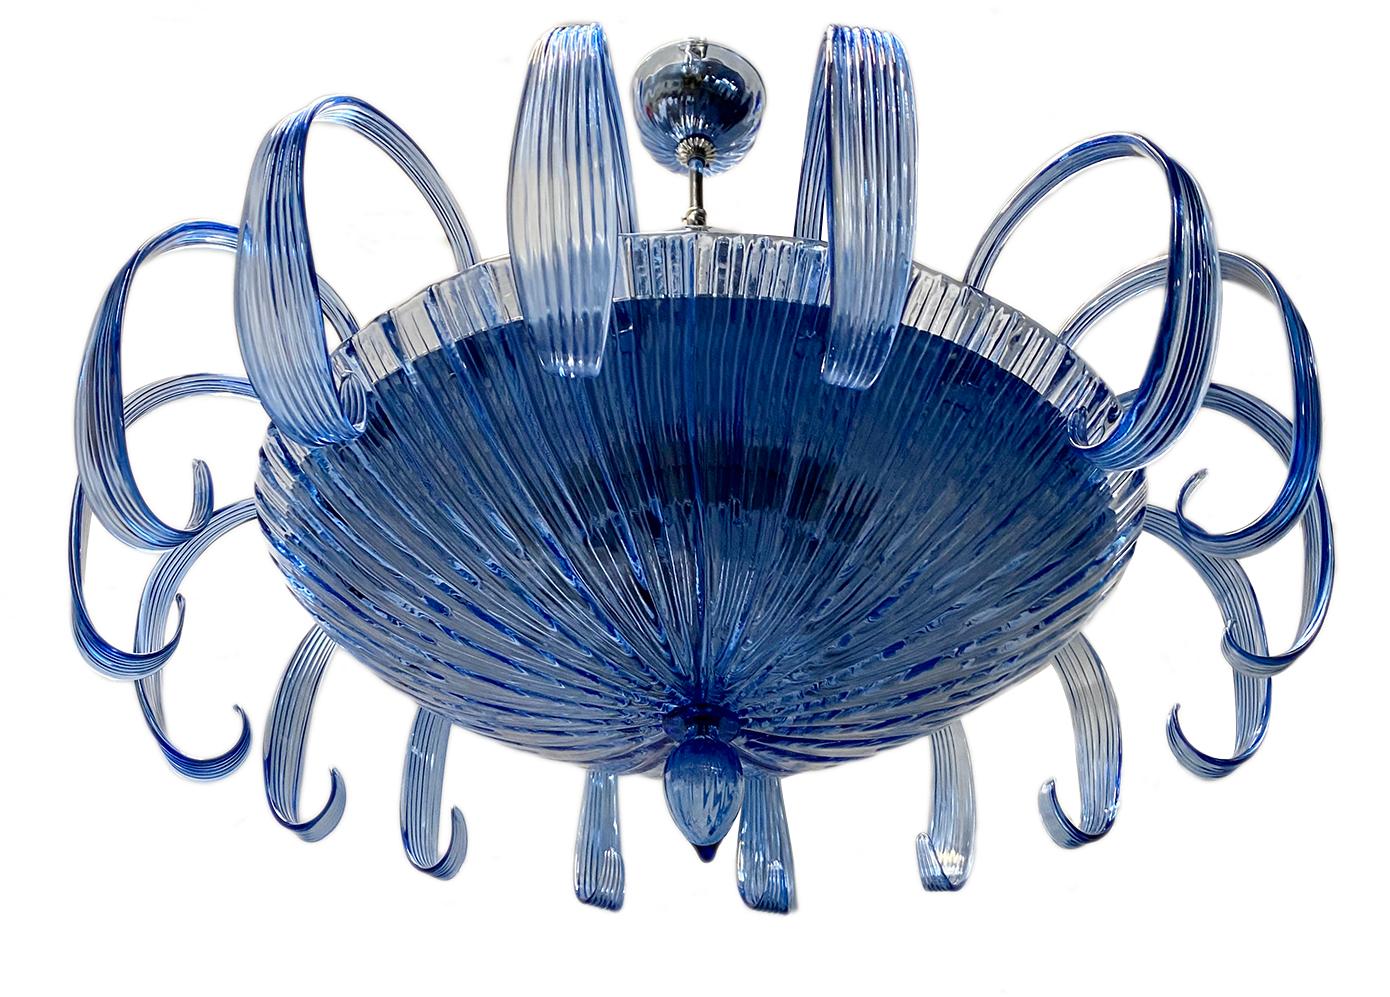 A pair of circa 1950's hand blown blue Murano glass chandeliers with interior lights. Sold individually.

Measurements:
Diameter: 33